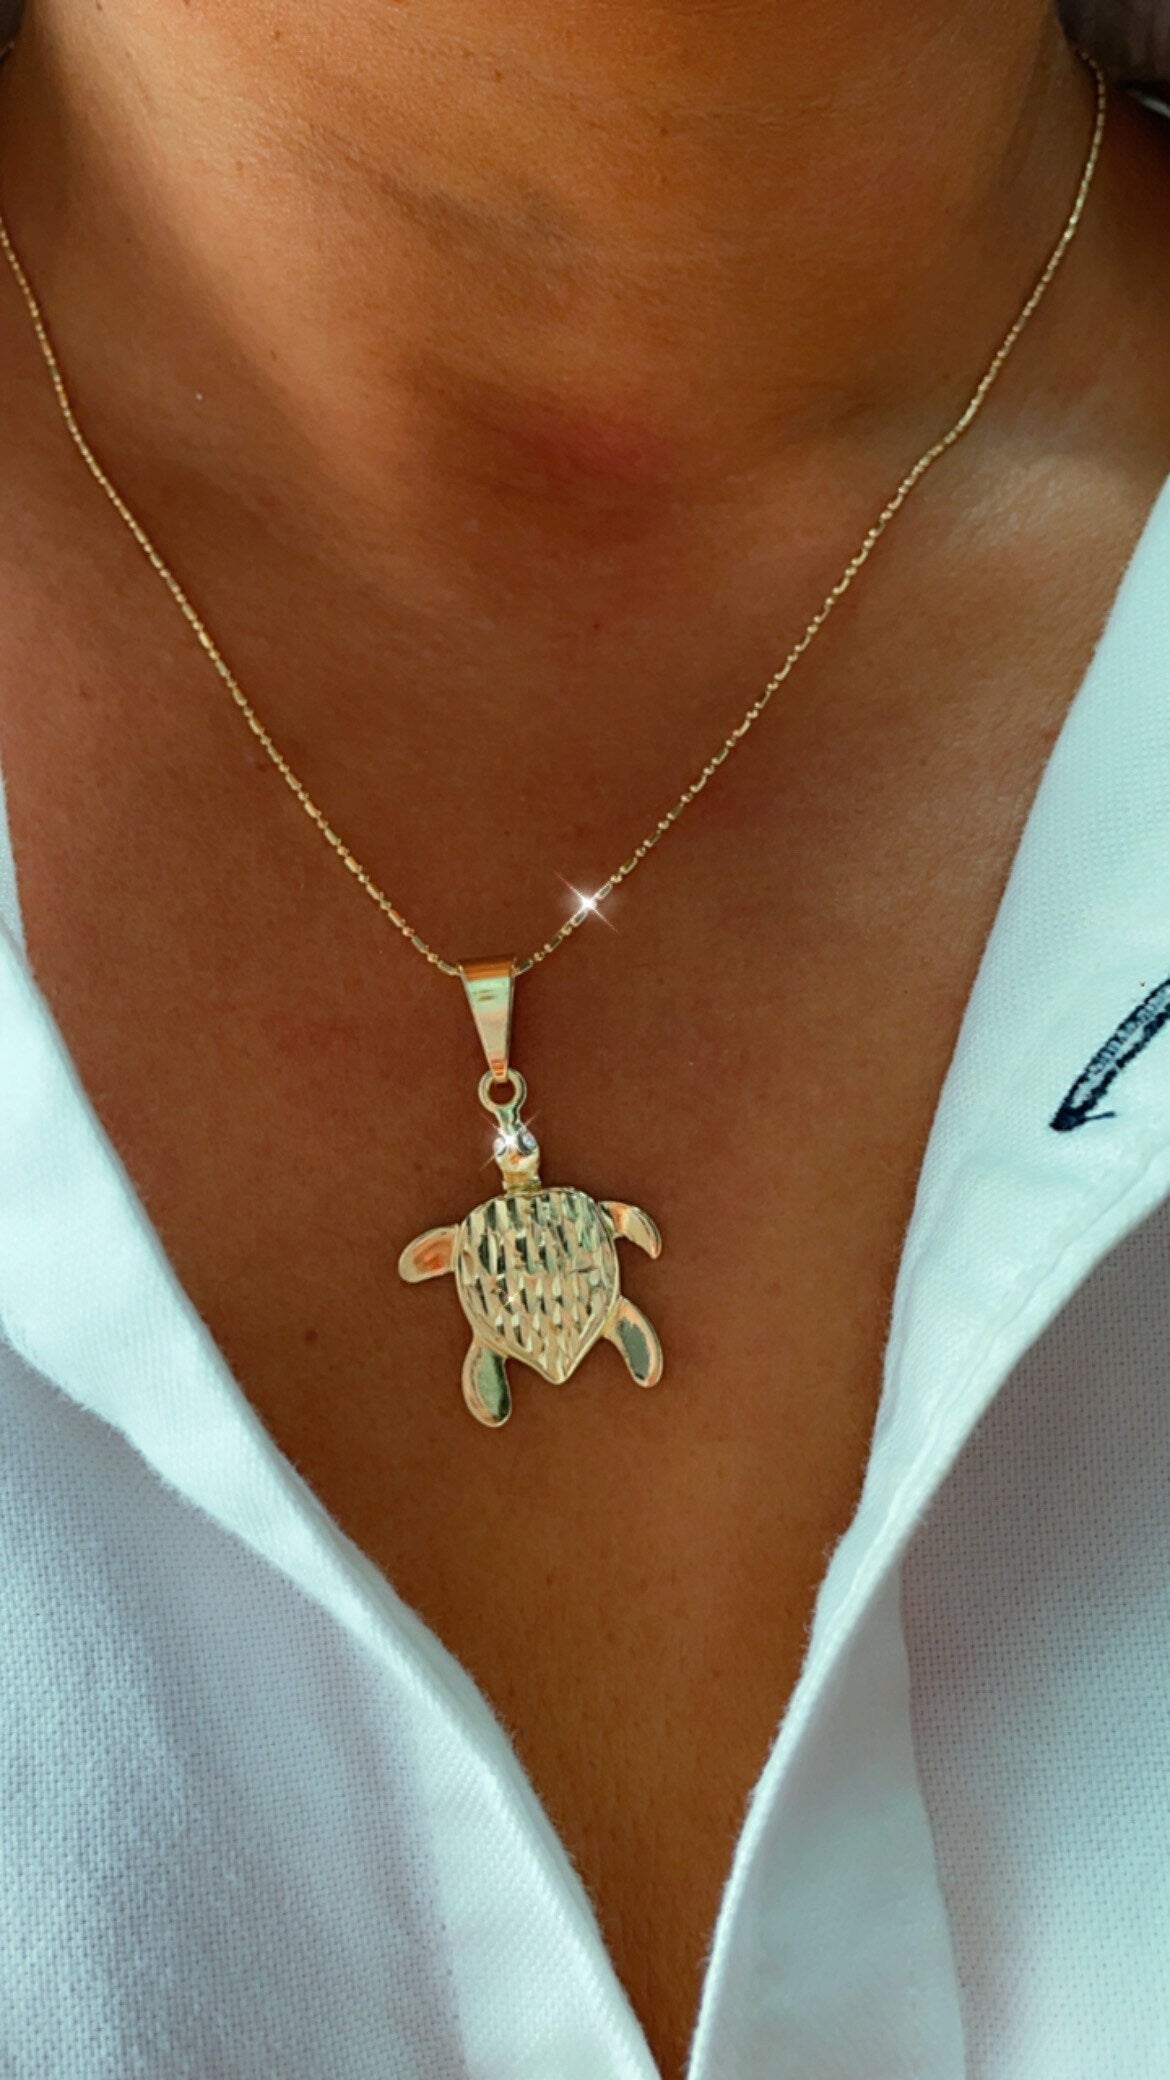 18k Gold Layered Ocean Turtle Charm Featuring Little Zirconia In the Eyes For